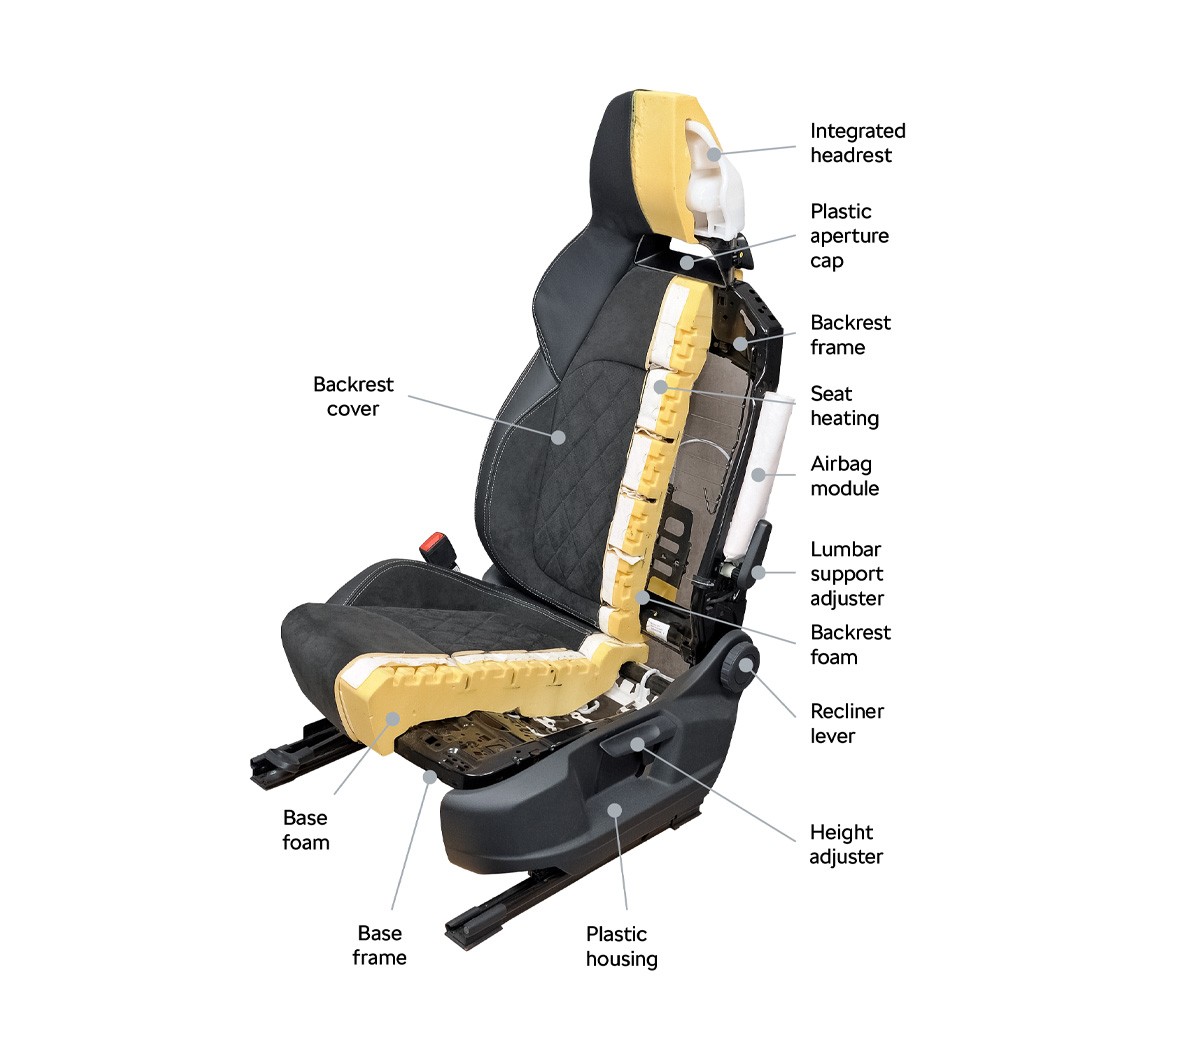 This Is How Car Seats Evolved Through the Years - autoevolution